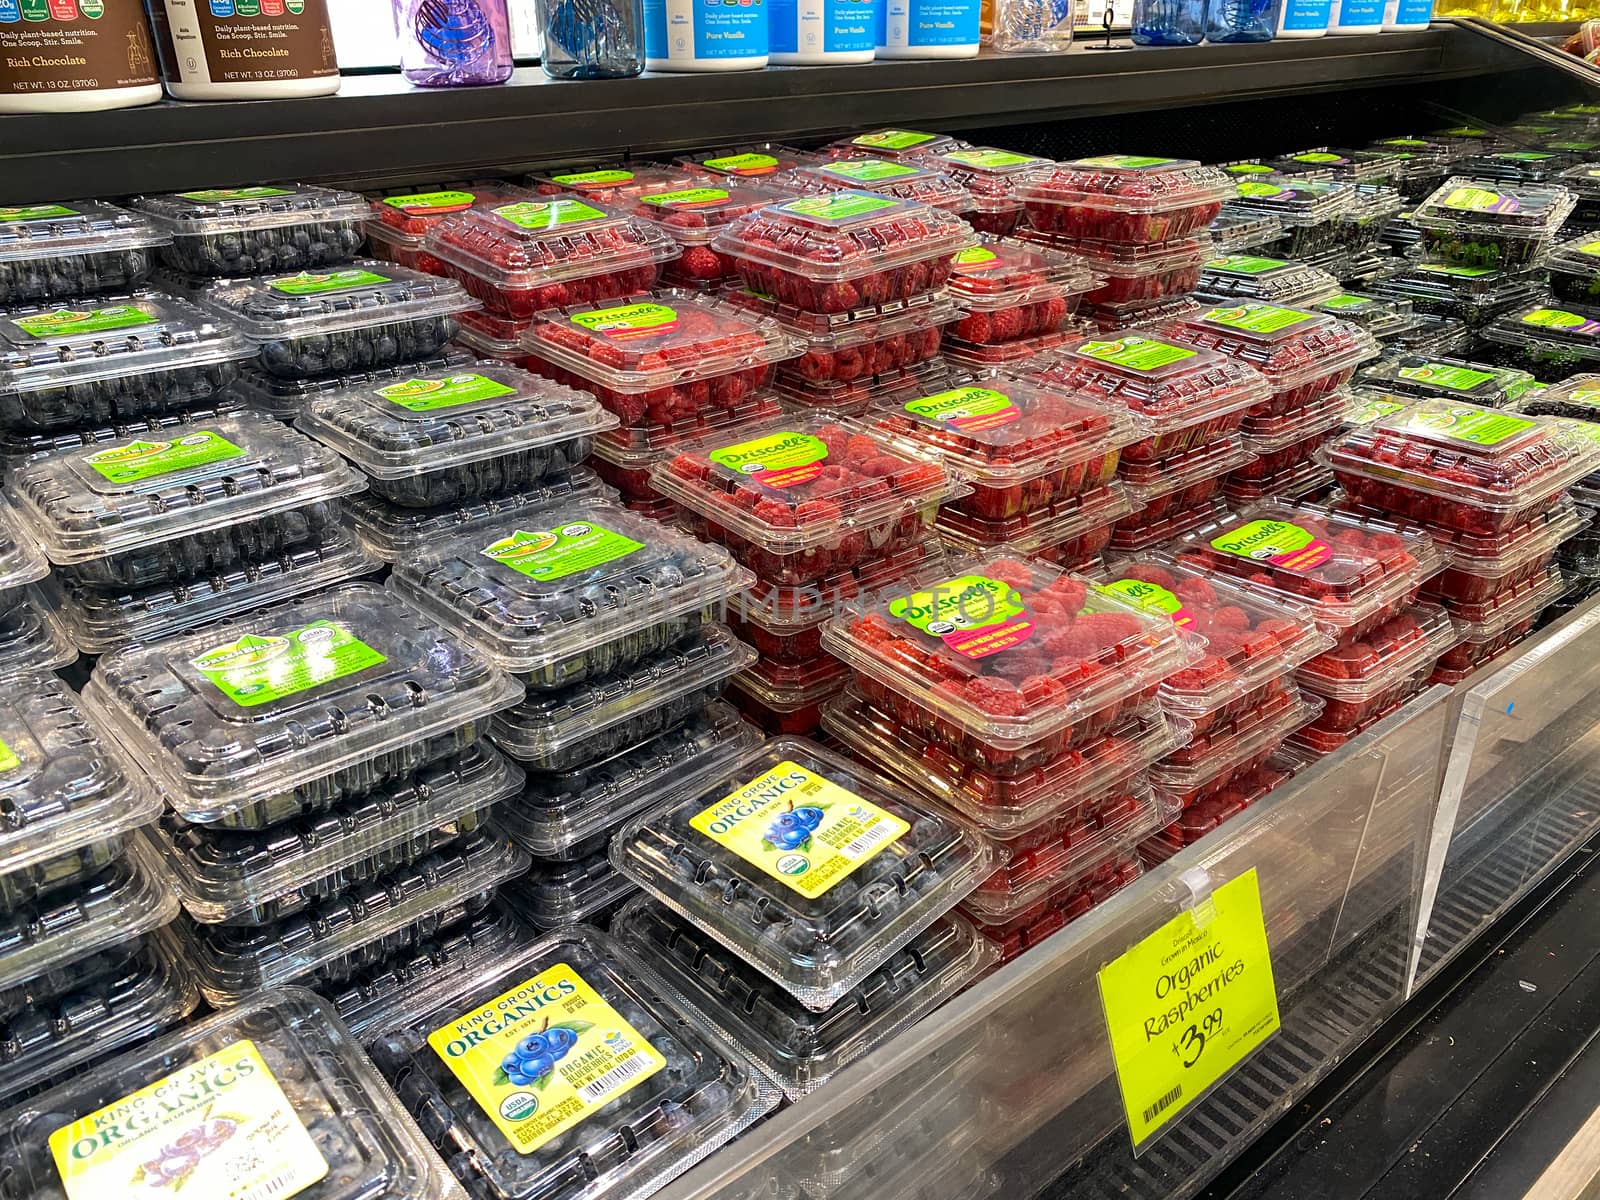 Boxes of raspberries and blueberrie at the fresh produce aisle o by Jshanebutt